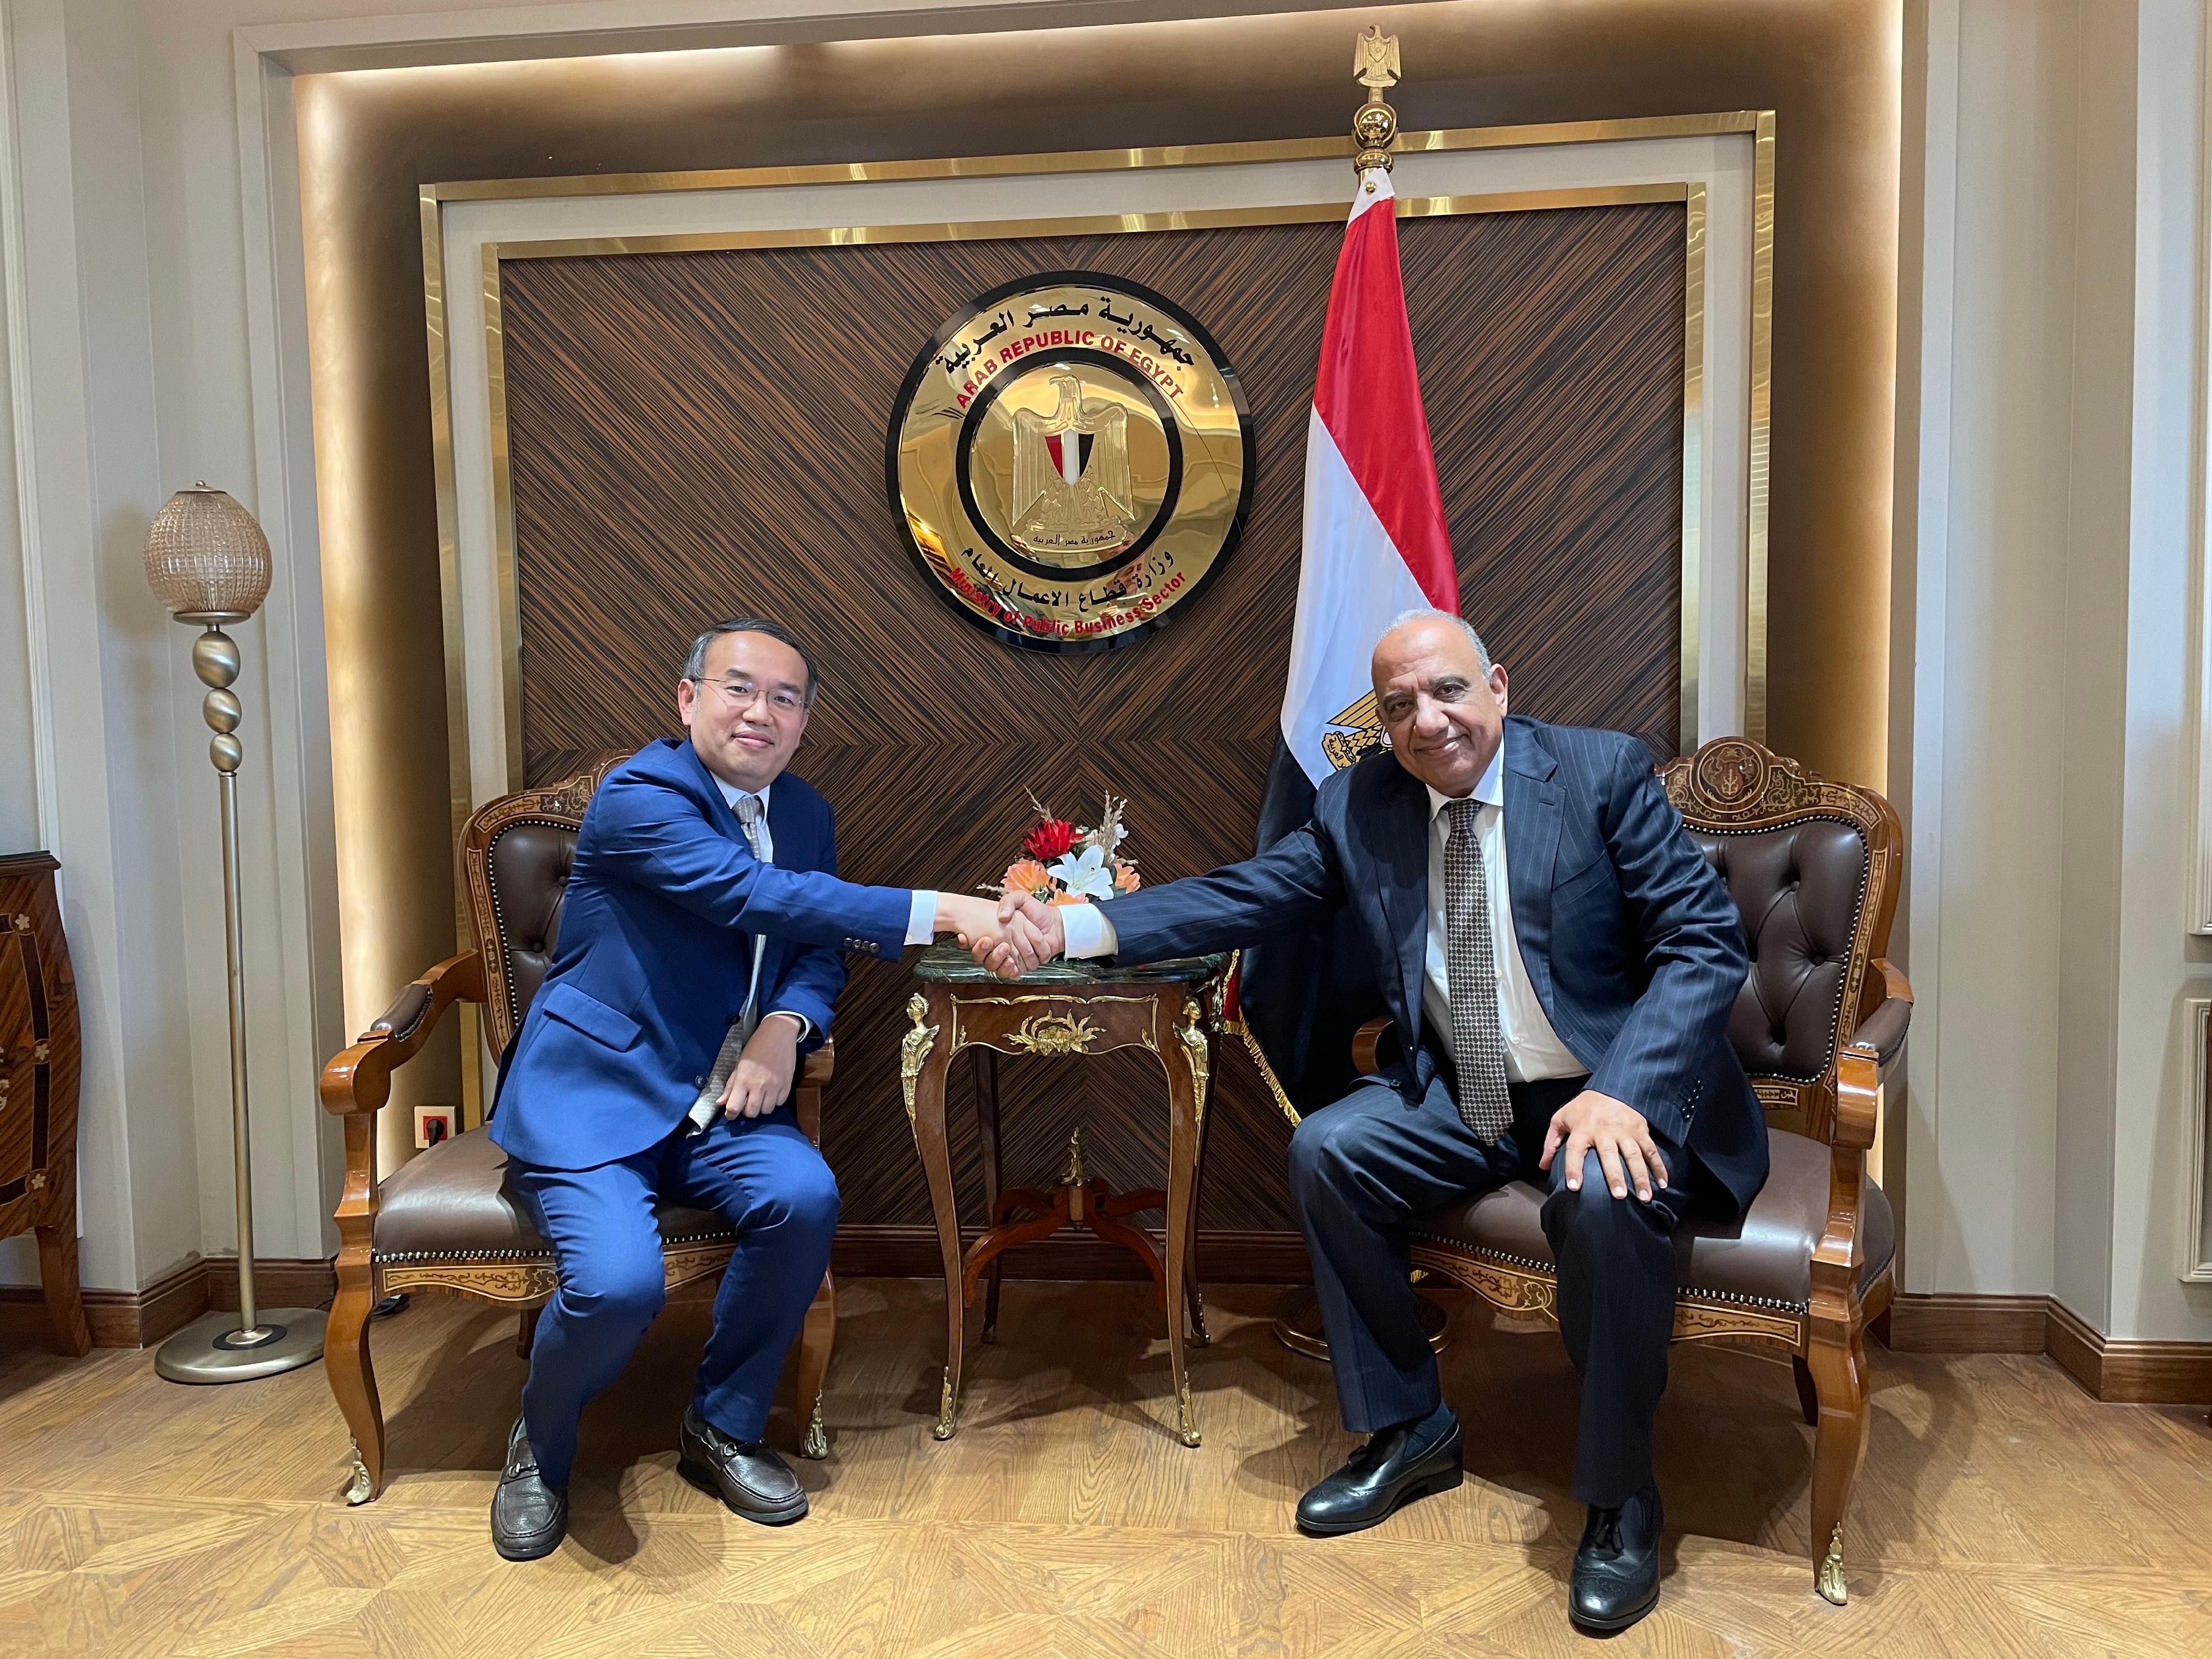 The Secretary for Financial Services and the Treasury, Mr Christopher Hui, continues his visit in Egypt. Photo shows Mr Hui (left) meeting with the Minister of Public Business Sector of Egypt, Mr Mahmoud Esmat (right), in Cairo on September 23 (Cairo time).
